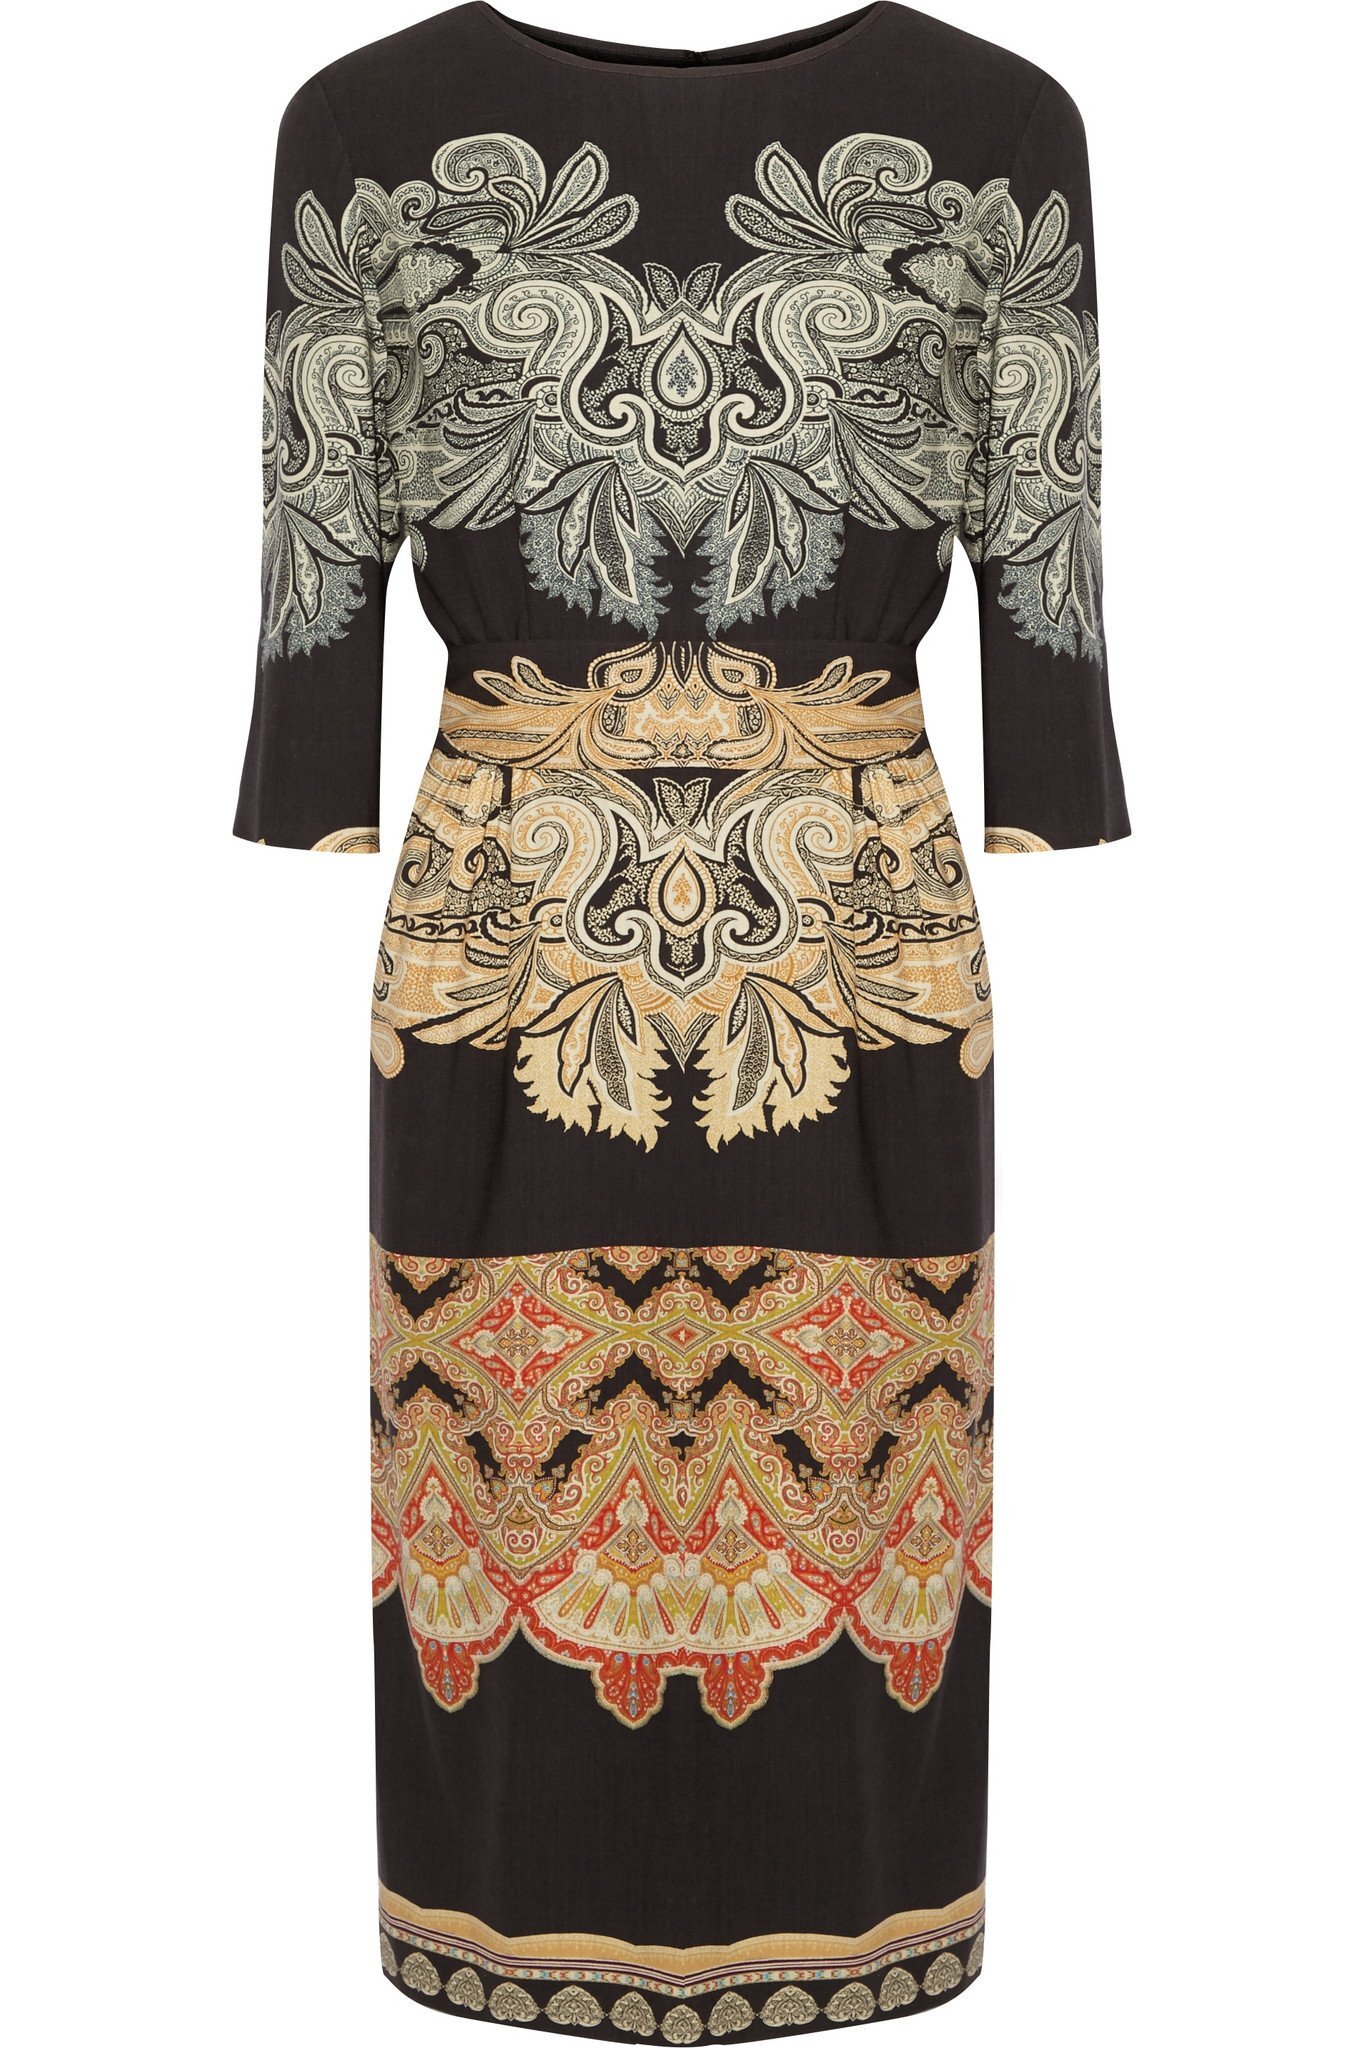 etro-black-belted-printed-wool-dress-product-0-859261053-normal.jpeg